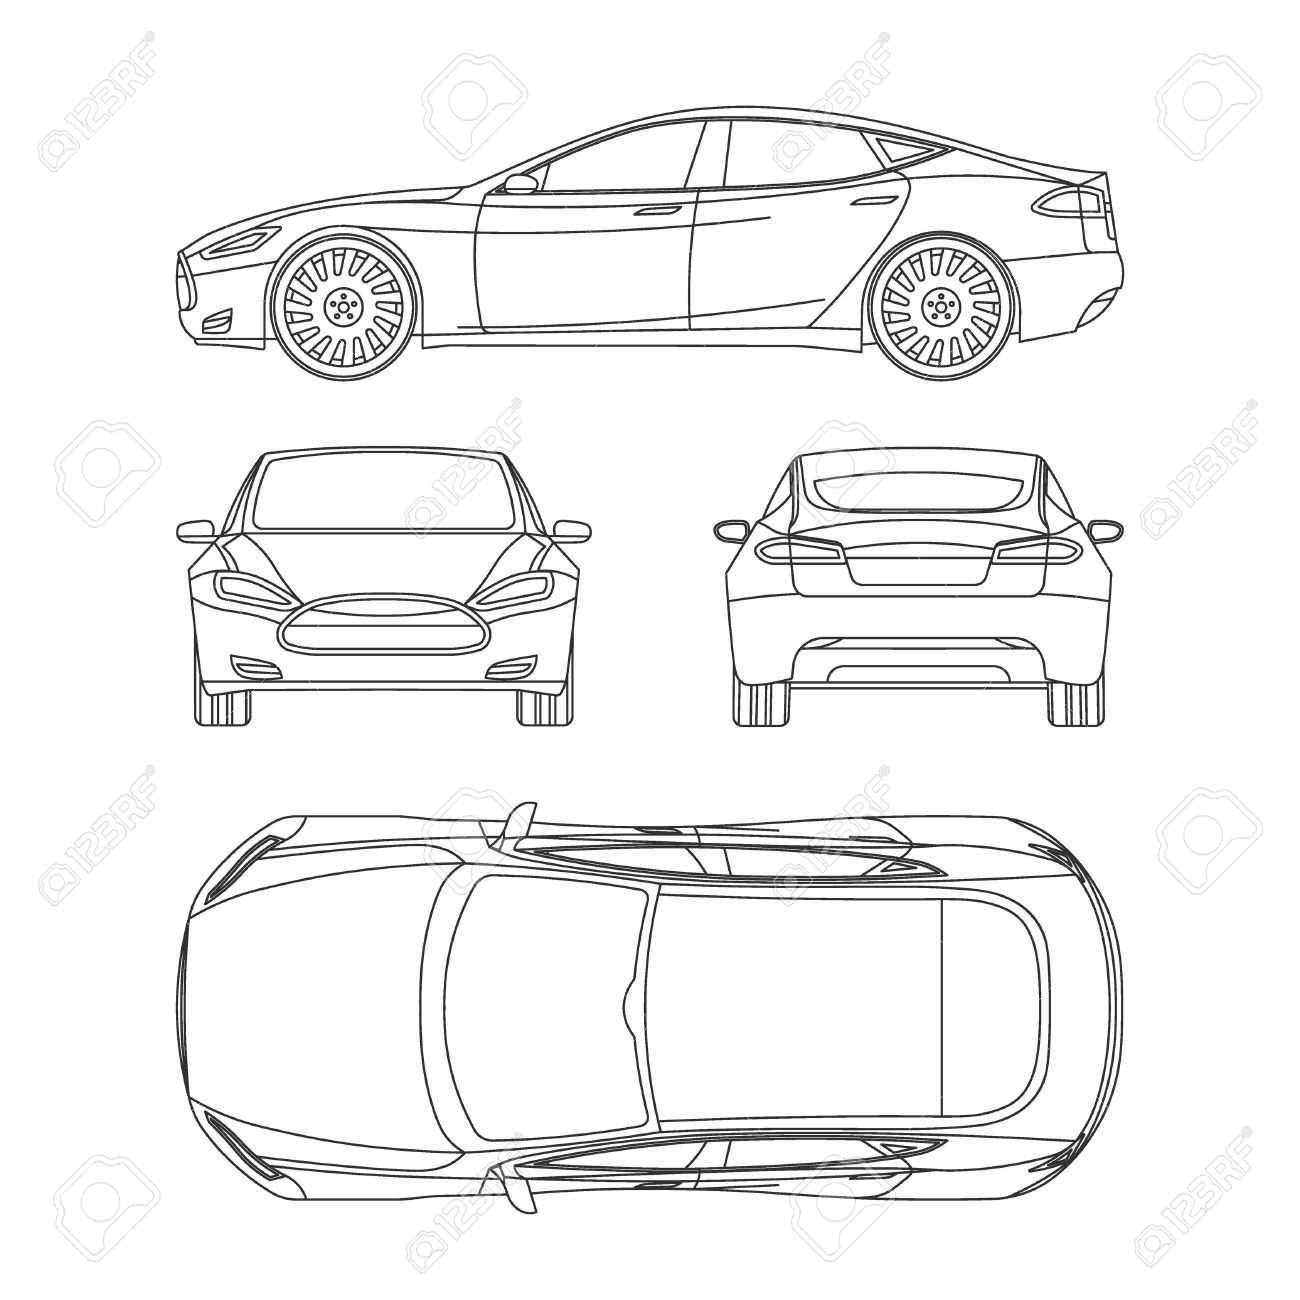 Car Line Draw Insurance, Rent Damage, Condition Report Form Blueprint With Car Damage Report Template